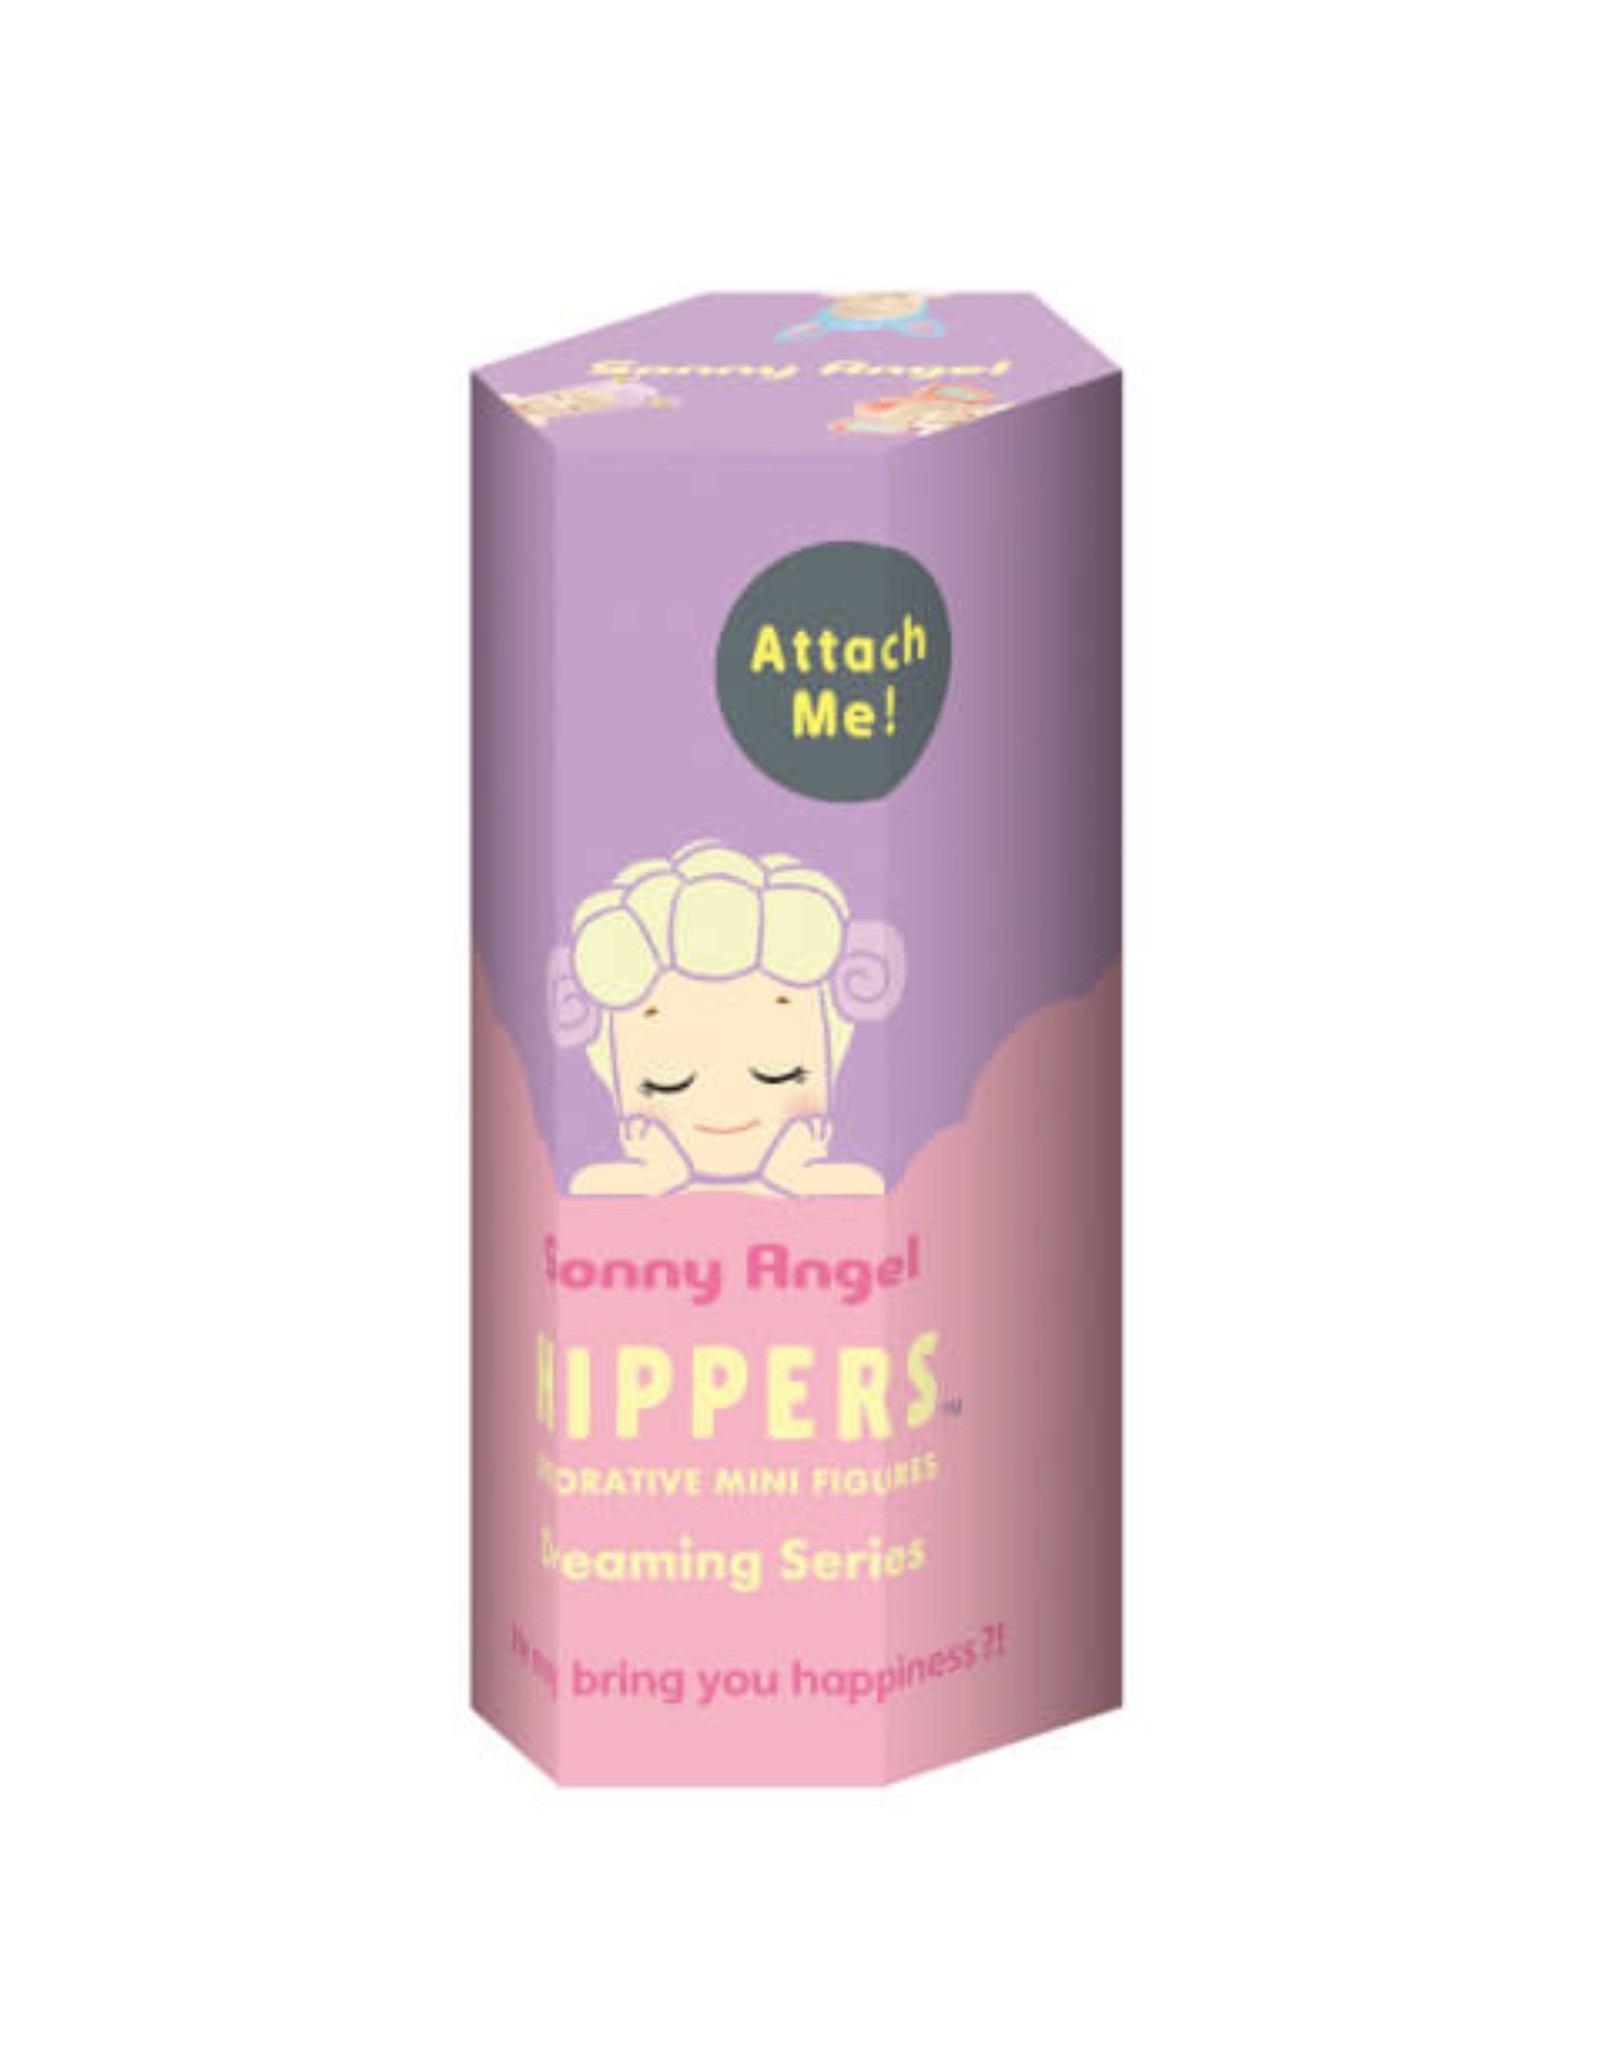 Sonny Angel Hippers Dreaming - Blind Box